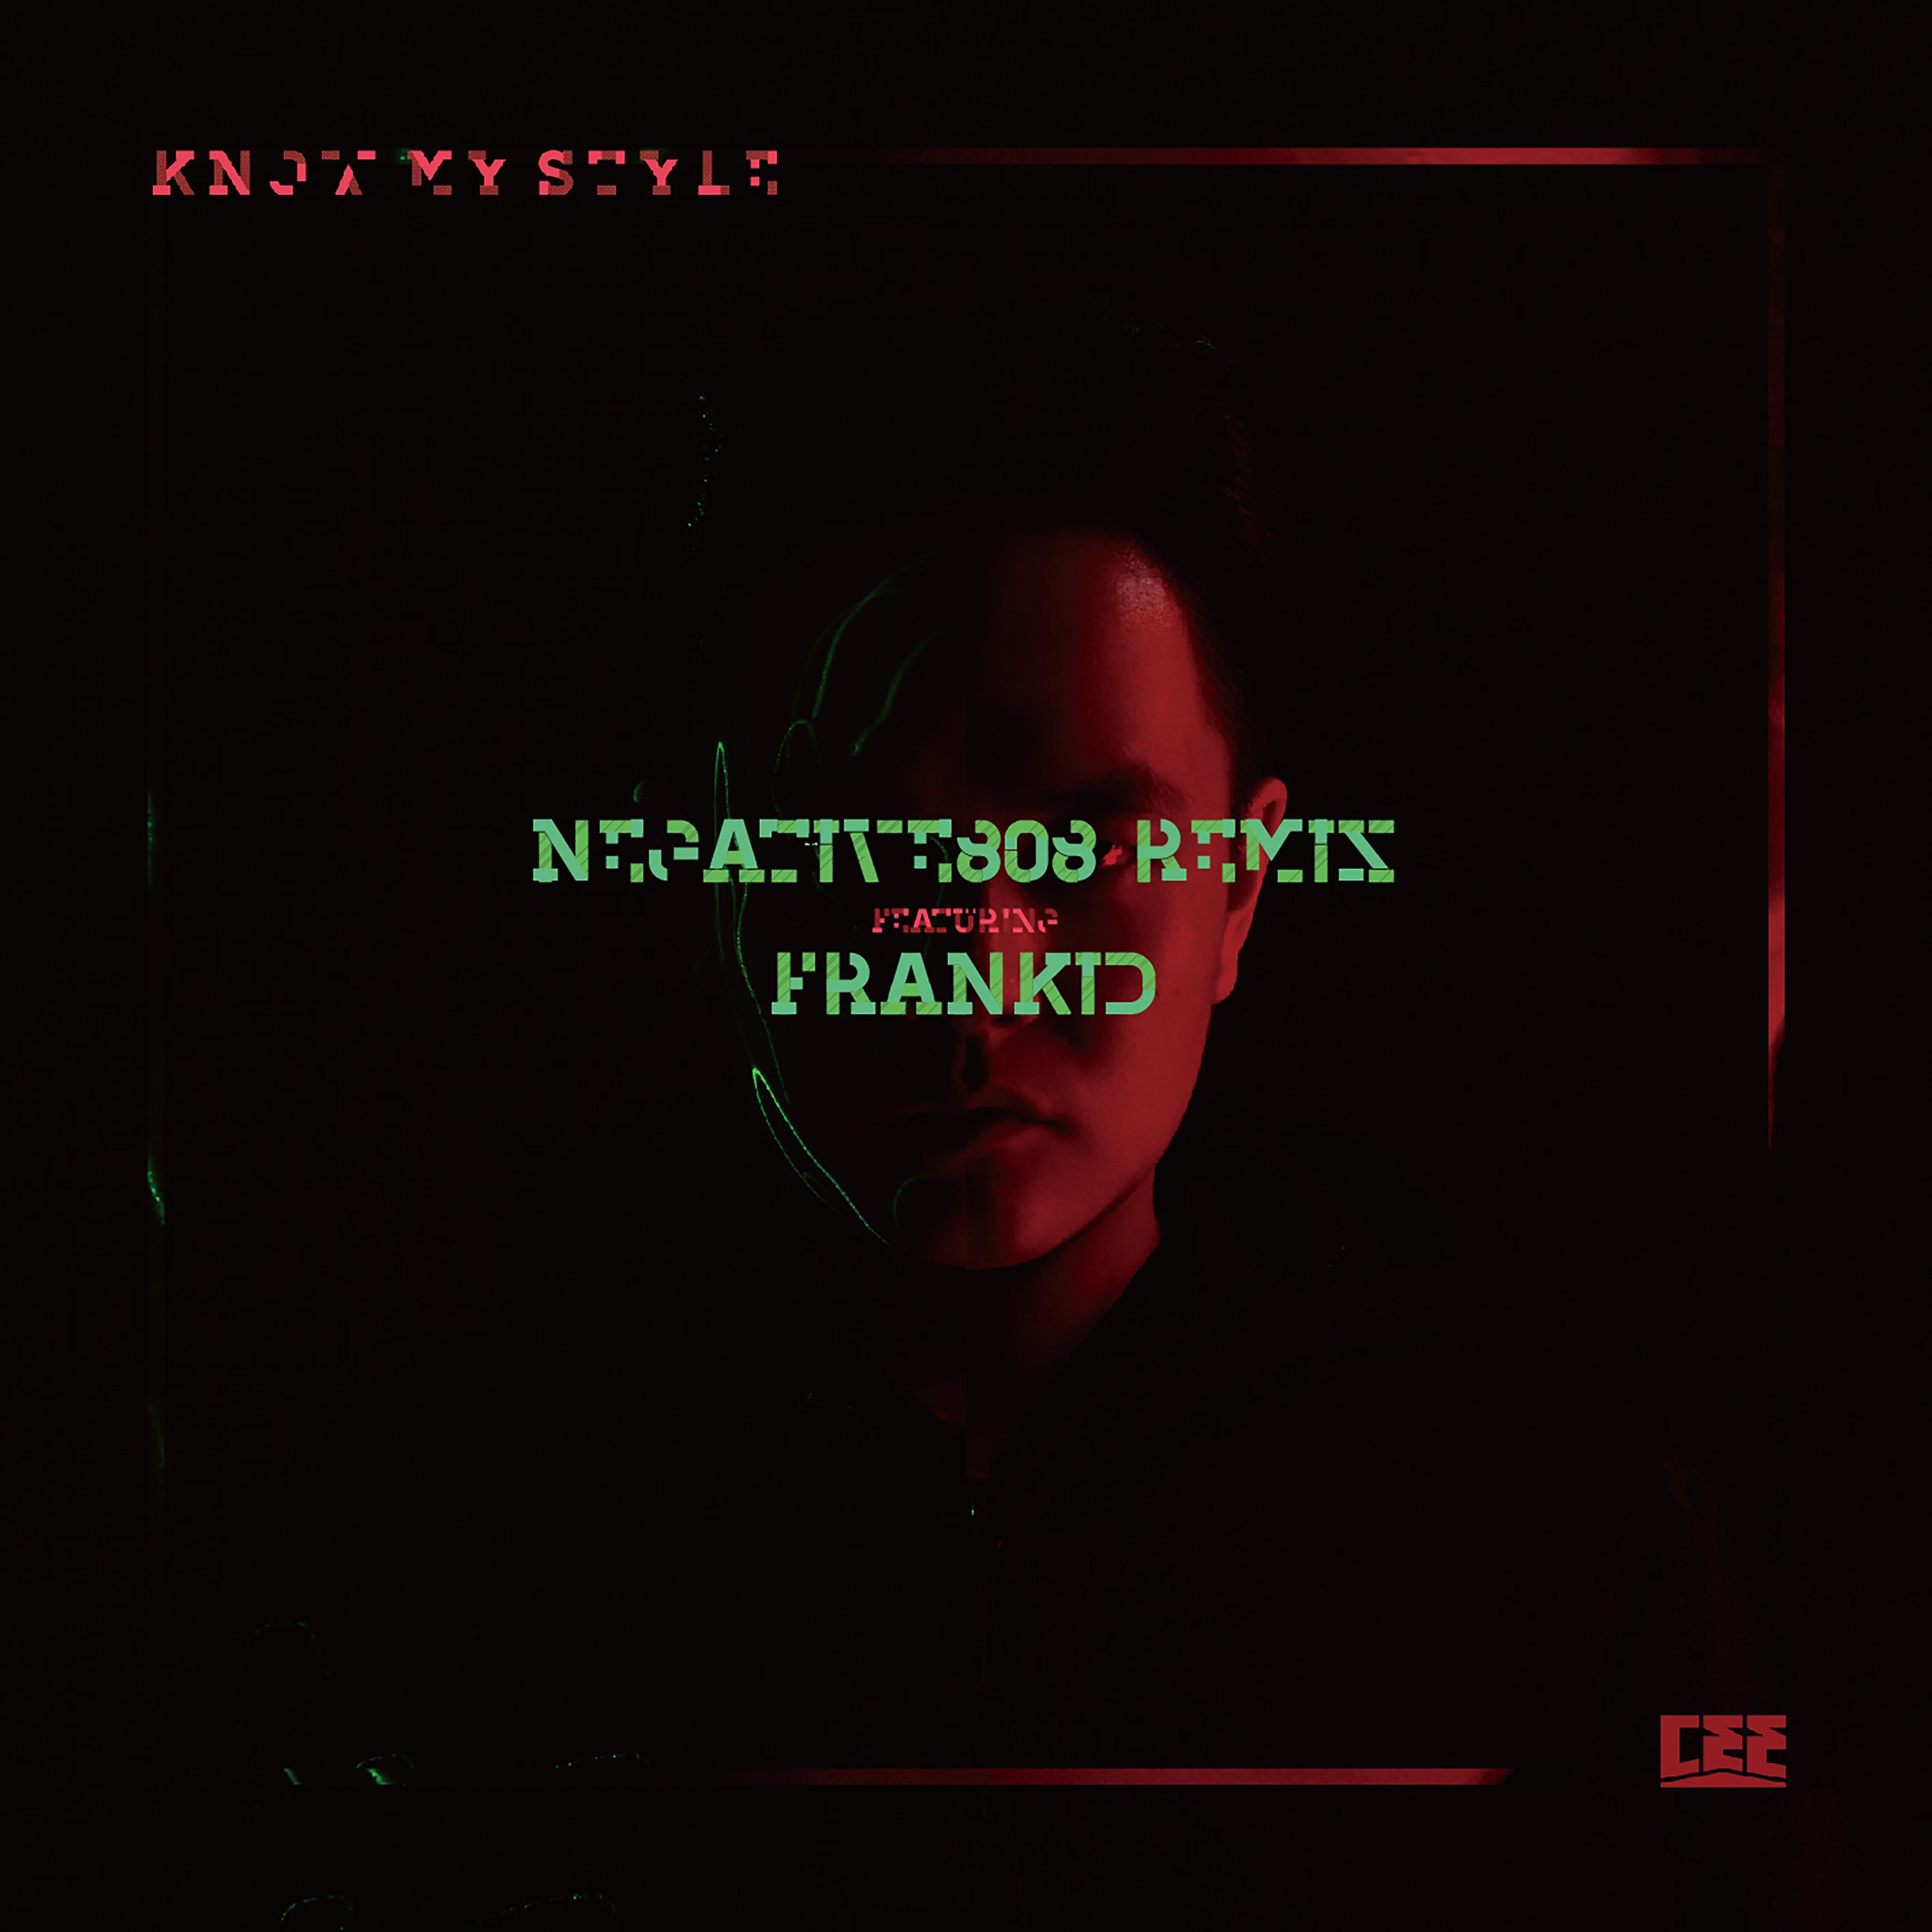 Know My Style (Negative808 Remix featuring FrankiD)